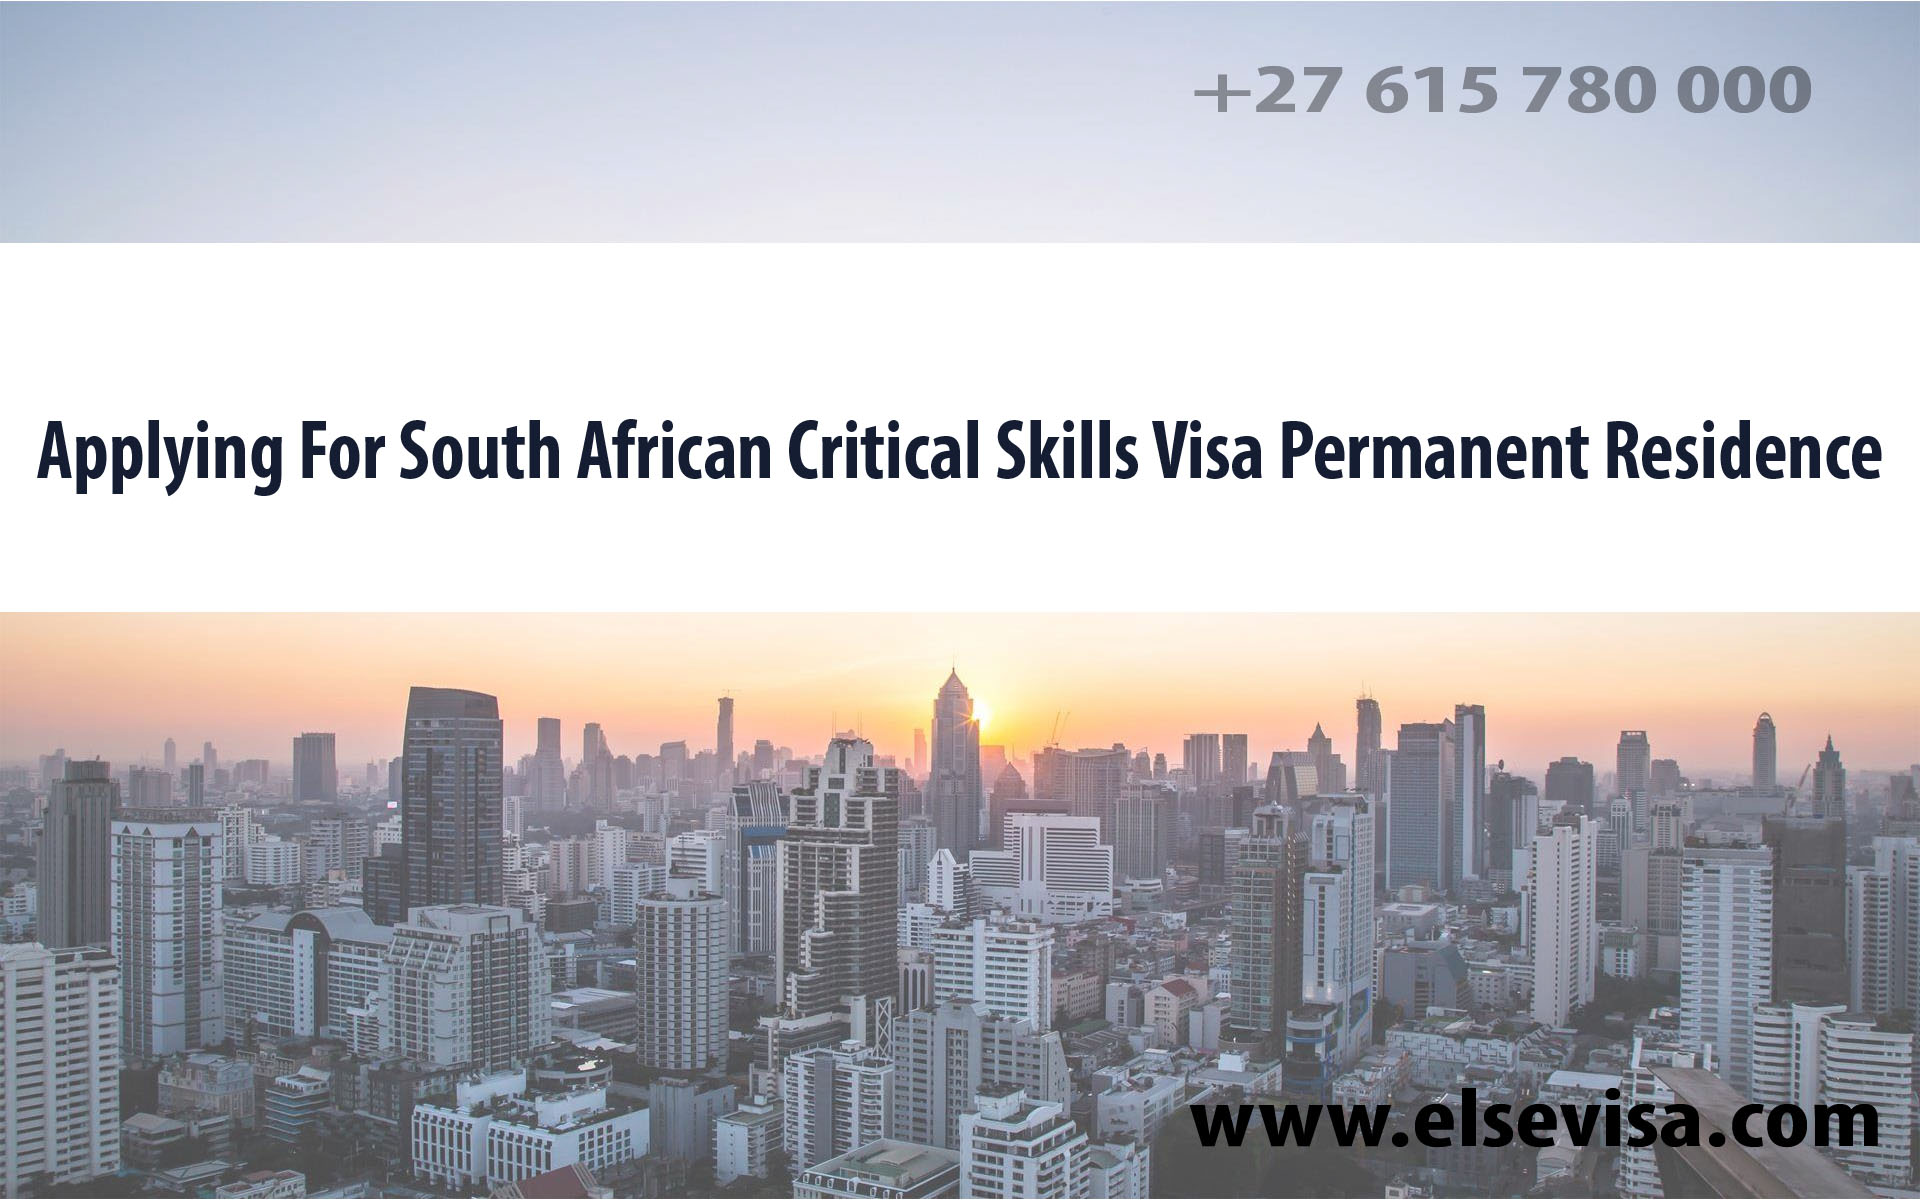  applying for south african critical skills visa permanent residence